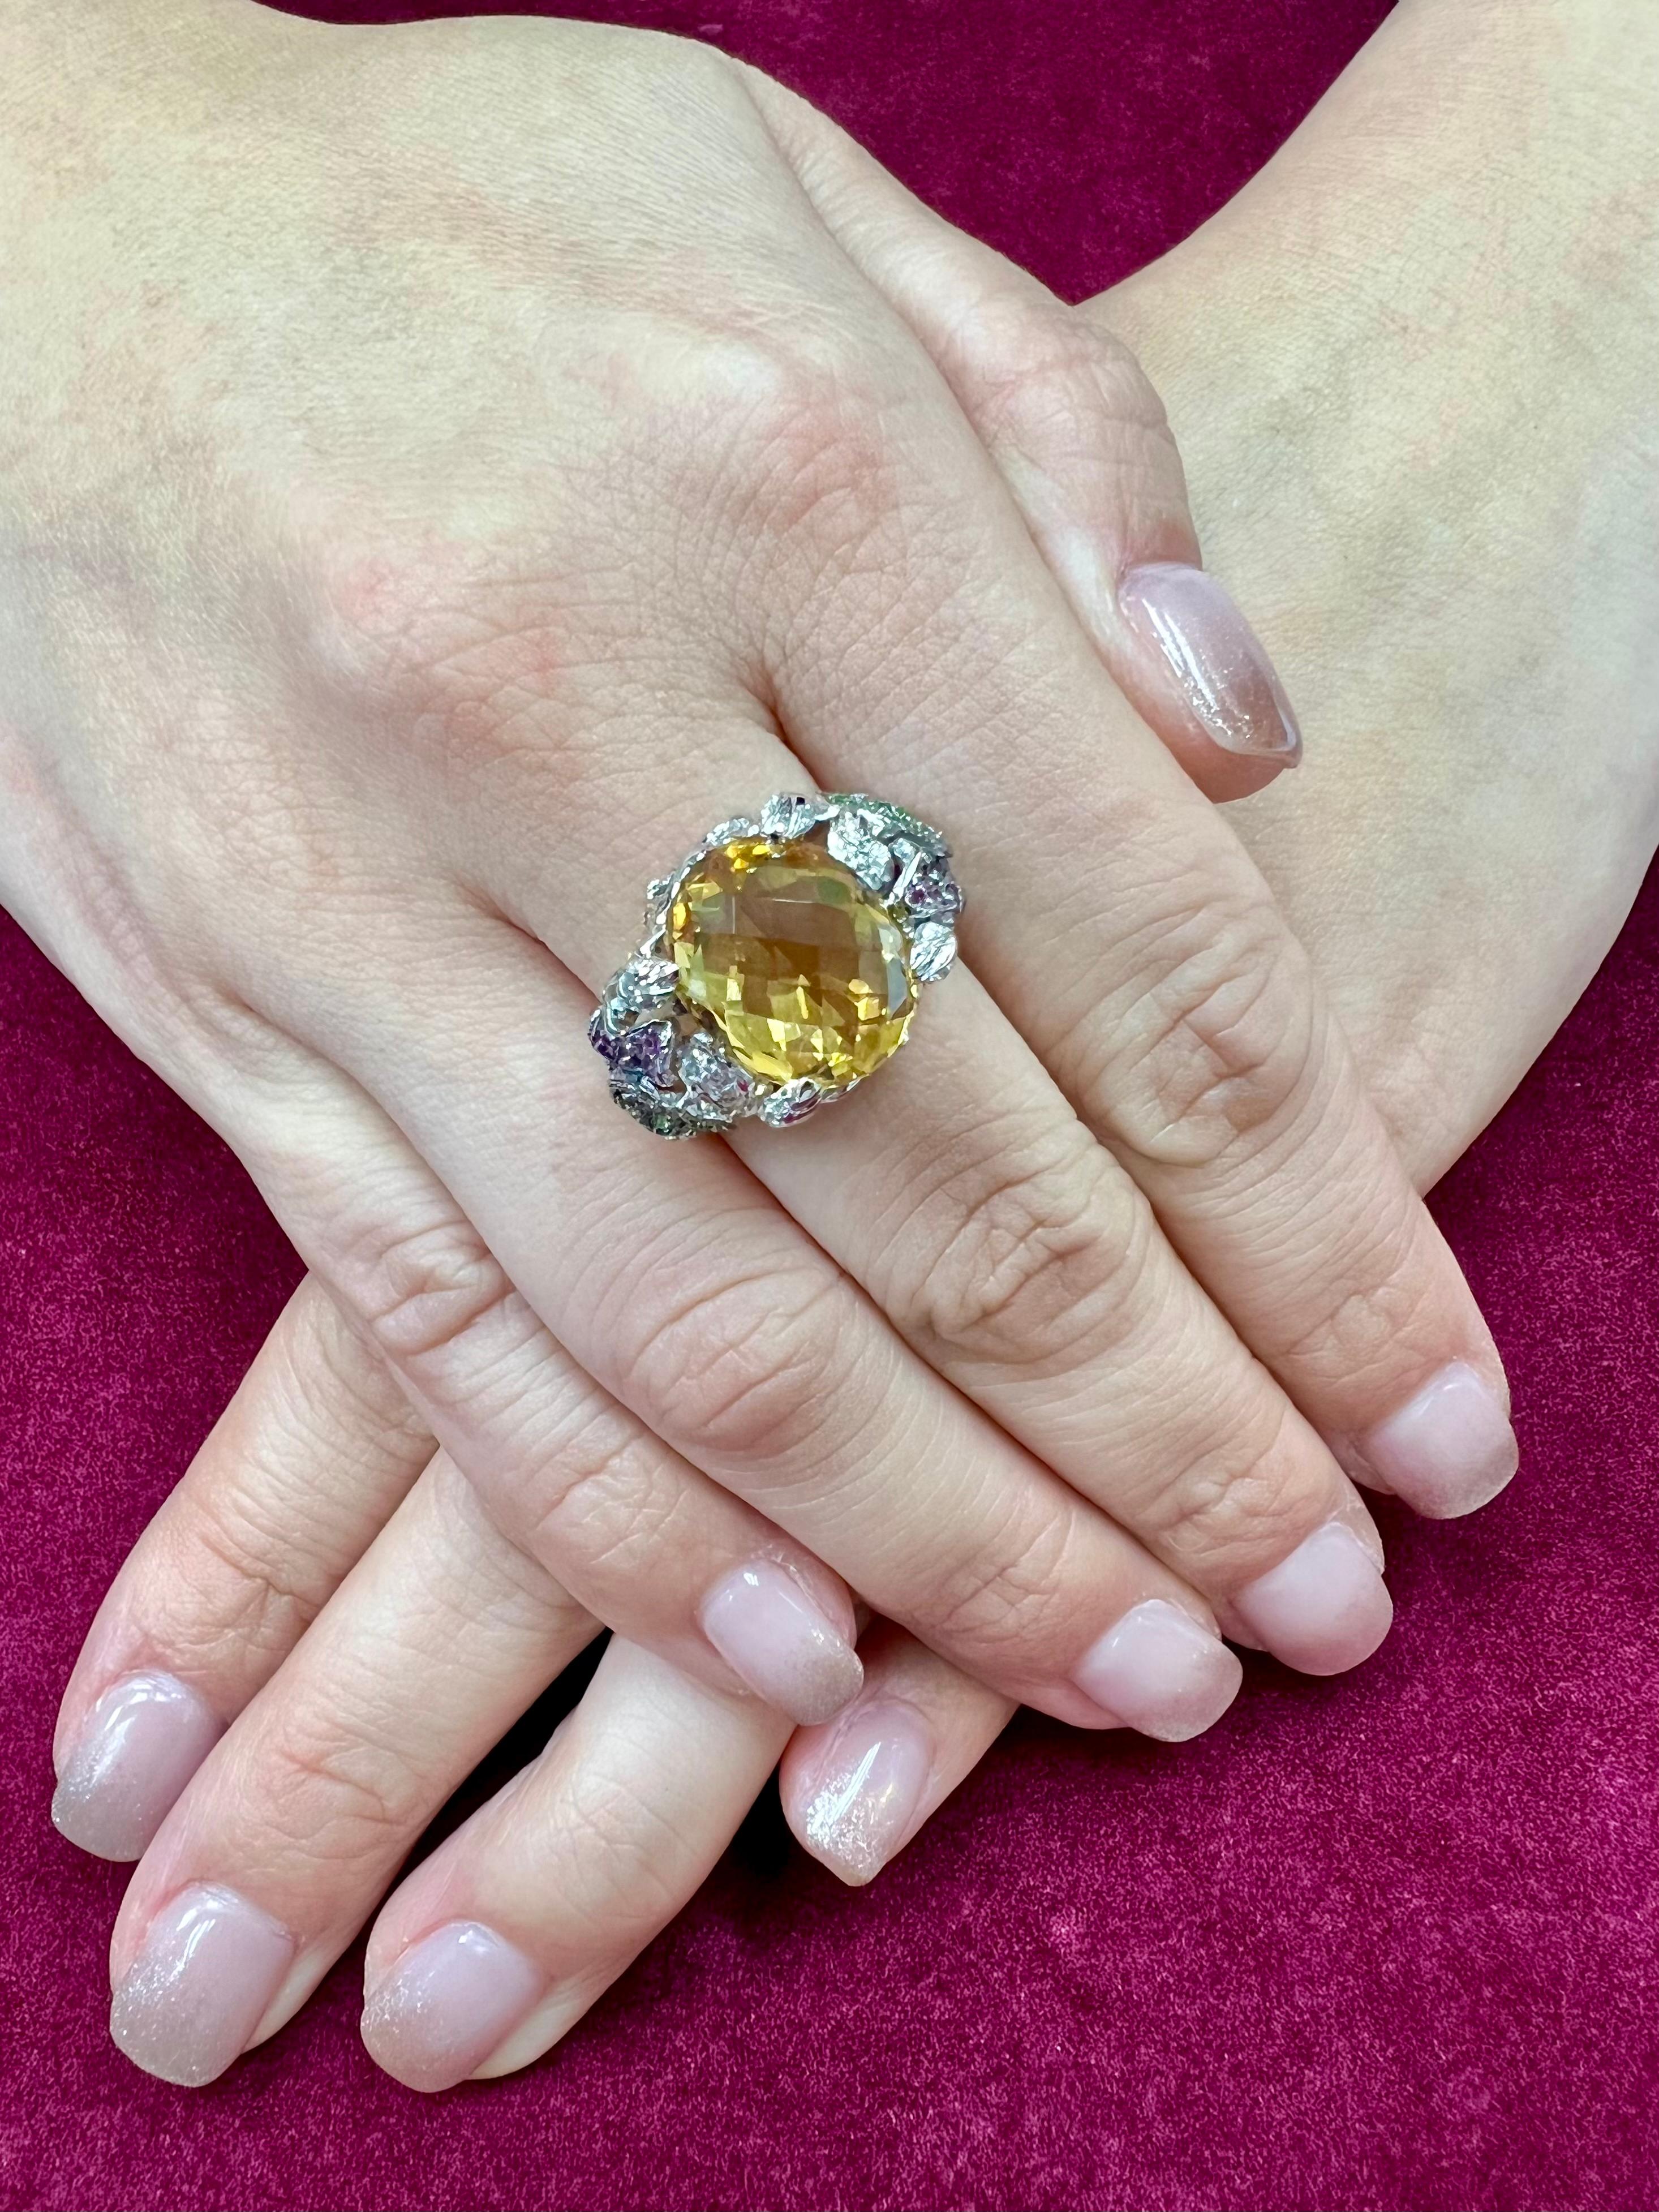 Please check out the HD video! Here is a super nice checker cut yellow Topaz, diamond and colored gemstone cocktail statement ring. It is set in 18k white gold. The 7.12 cts center checker cut Topaz is well cut. The colored gemstones (0.75cts) in